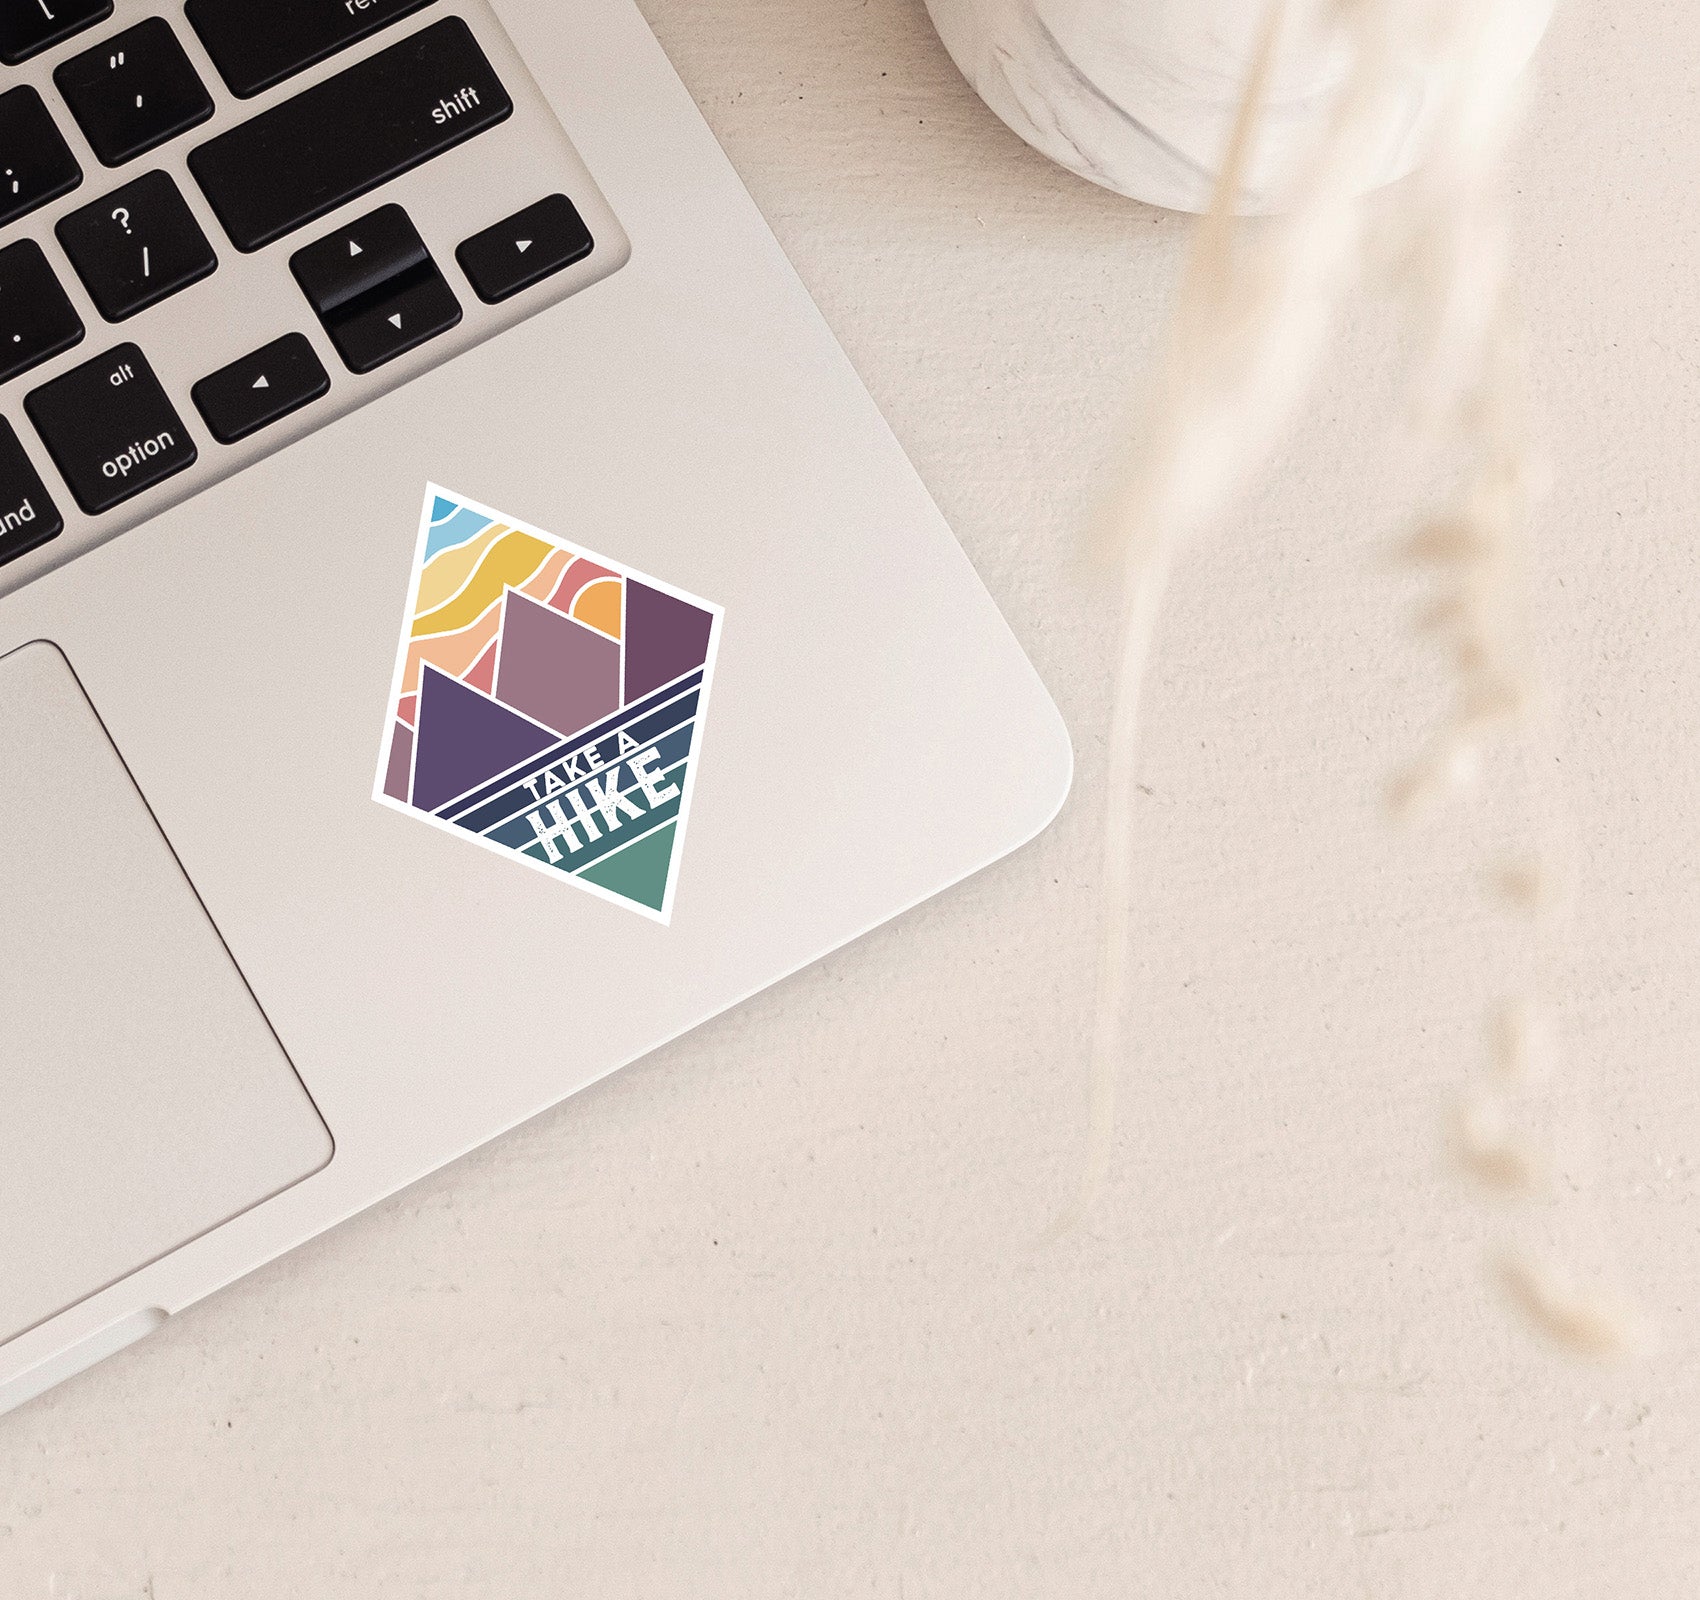 Take a hike laptop sticker with mountains at sunset